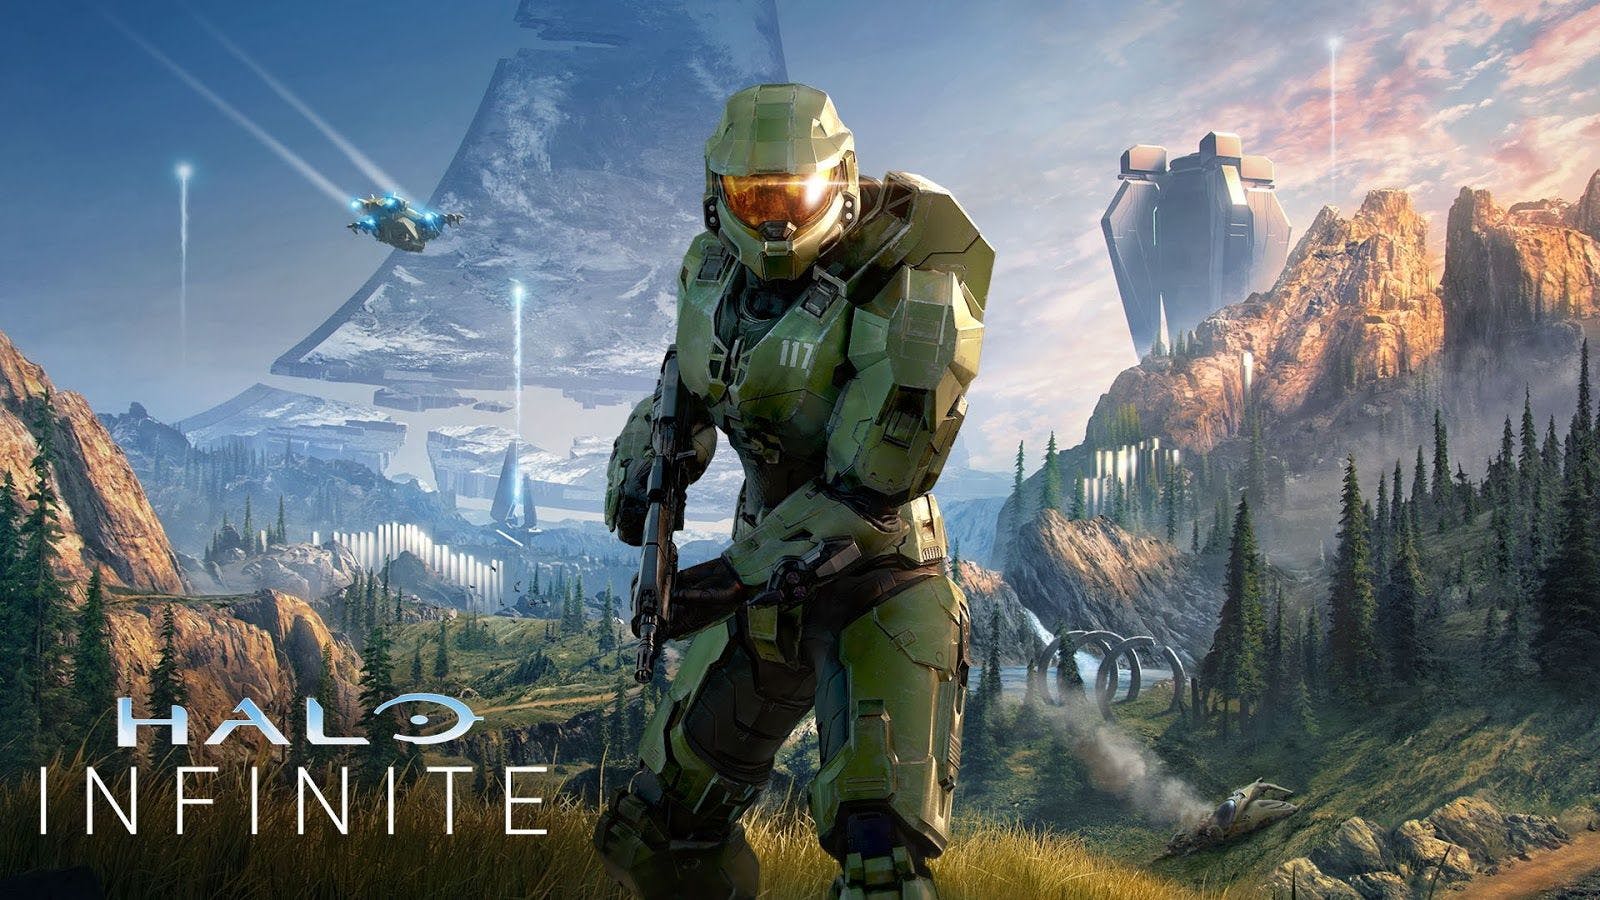 /the-new-halo-game-halo-infinite-release-date-and-gameplay-ece33d0 feature image